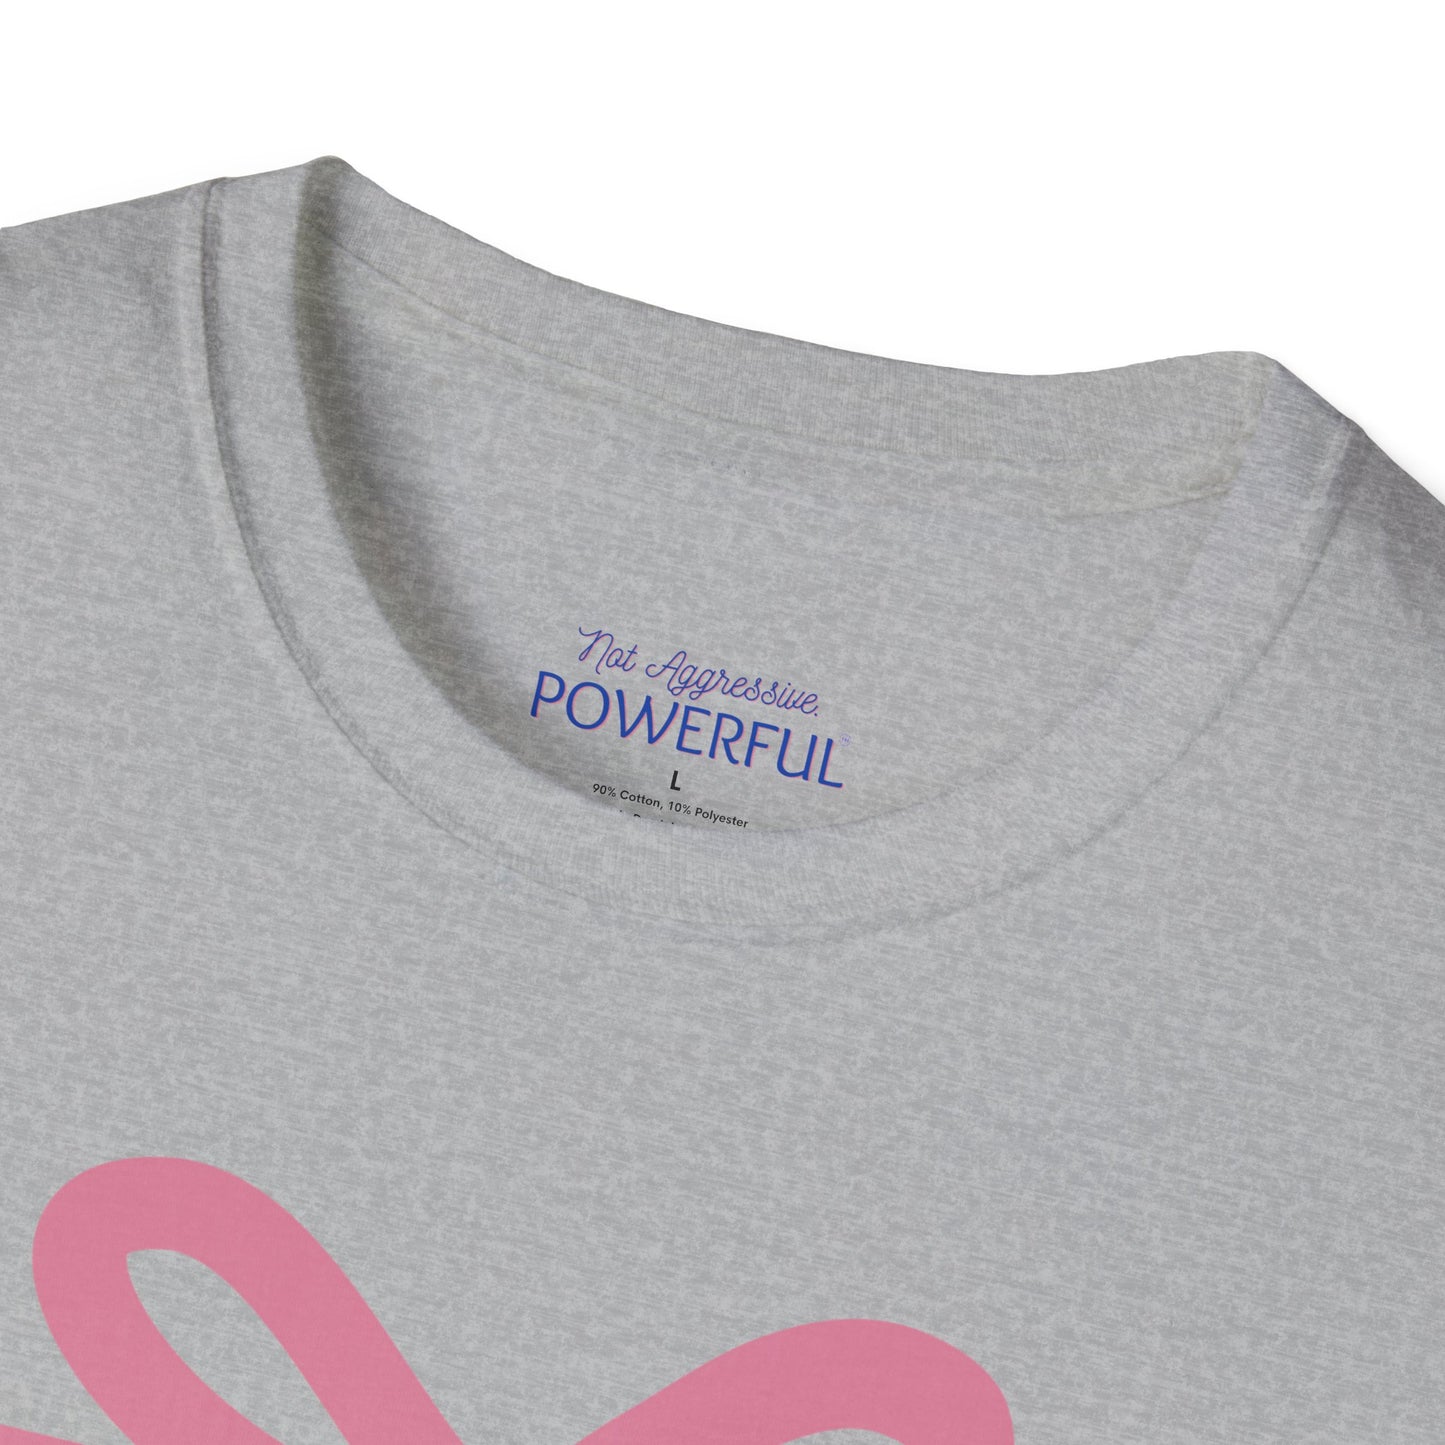 BE Present Not Aggressive. POWERFUL™️Unisex Softstyle T-Shirt Eurofit